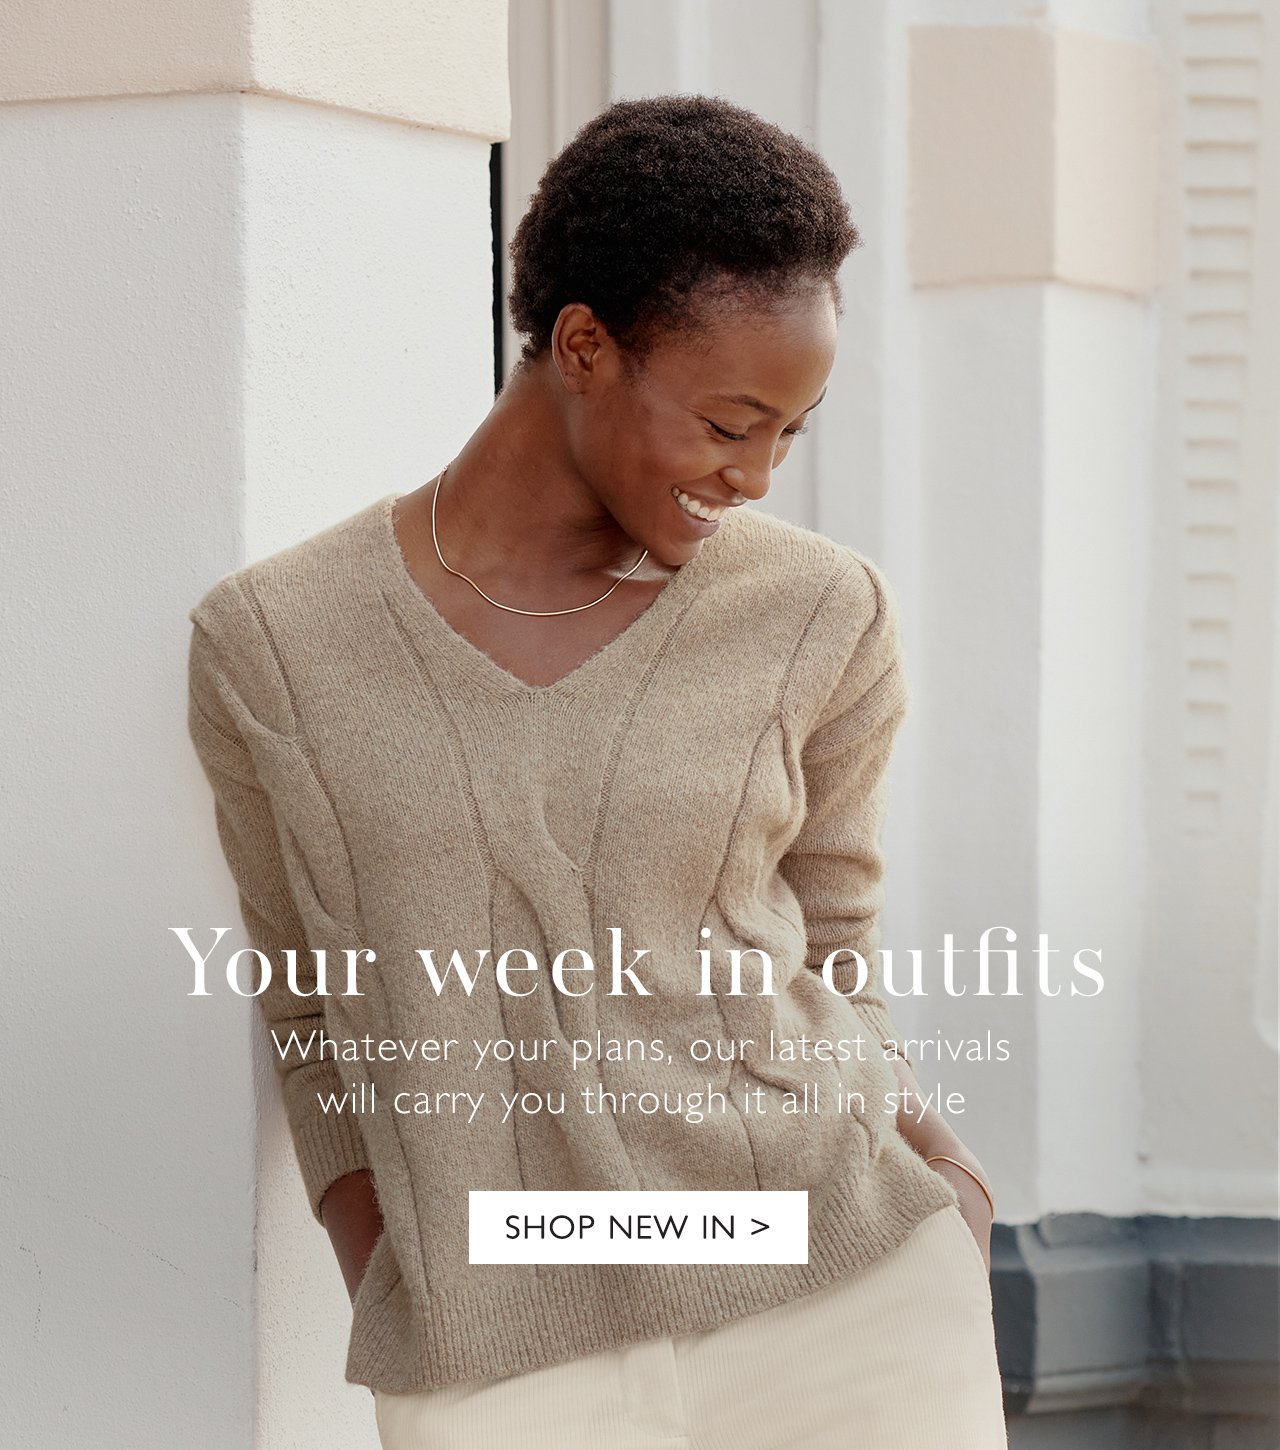 Your week in outfits | SHOP NEW IN